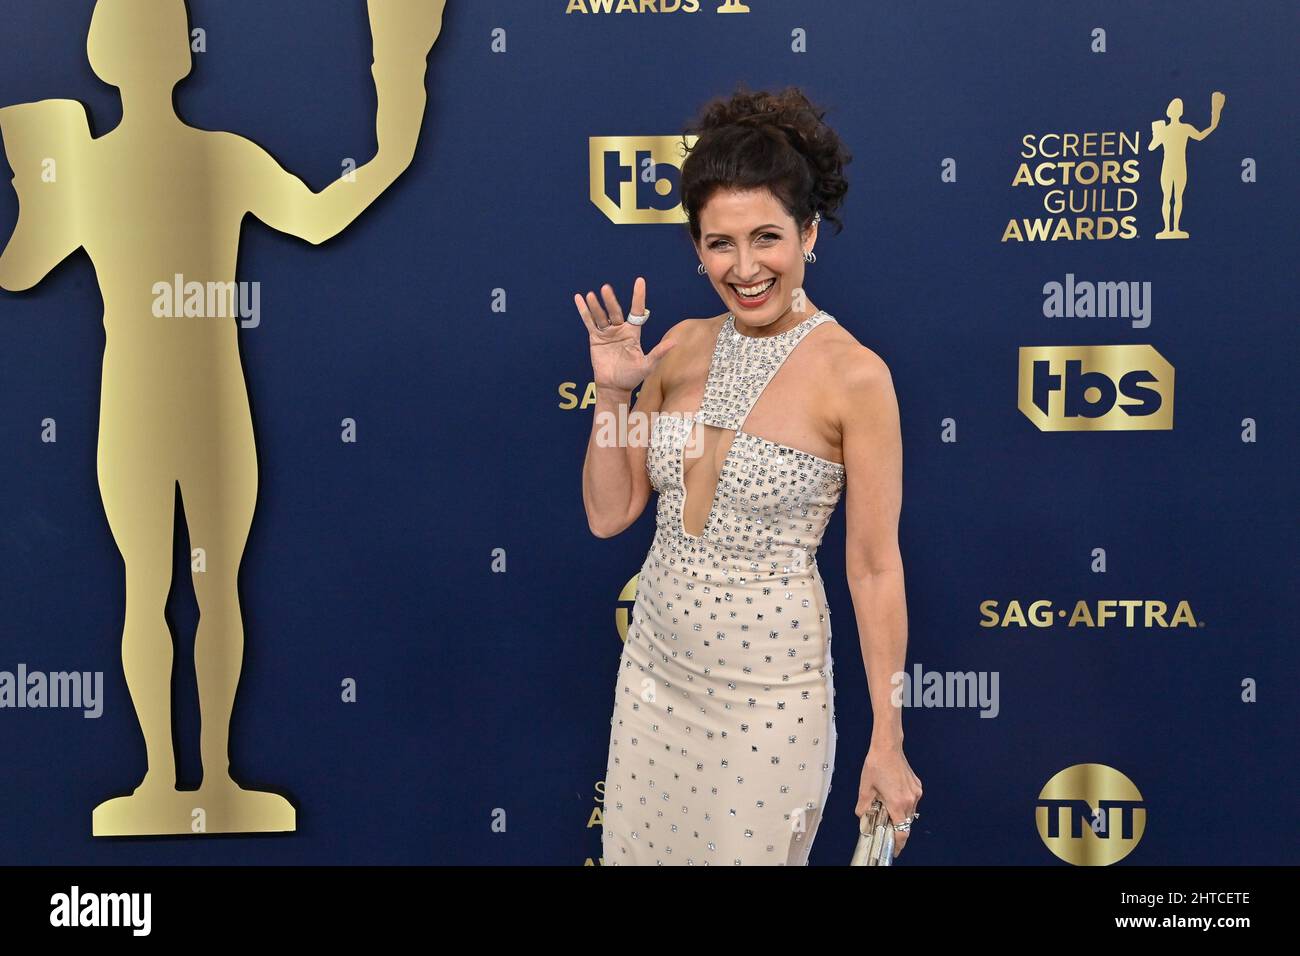 Santa Monica, United States. 28th Feb, 2022. Lisa Edelstein attends the 28th annual SAG Awards held at The Barker Hangar in Santa Monica, California on Sunday, February 27, 2022. The Screen Actors Guild Awards was broadcast live on TNT and TBS. Photo by Jim Ruymen/UPI Credit: UPI/Alamy Live News Stock Photo